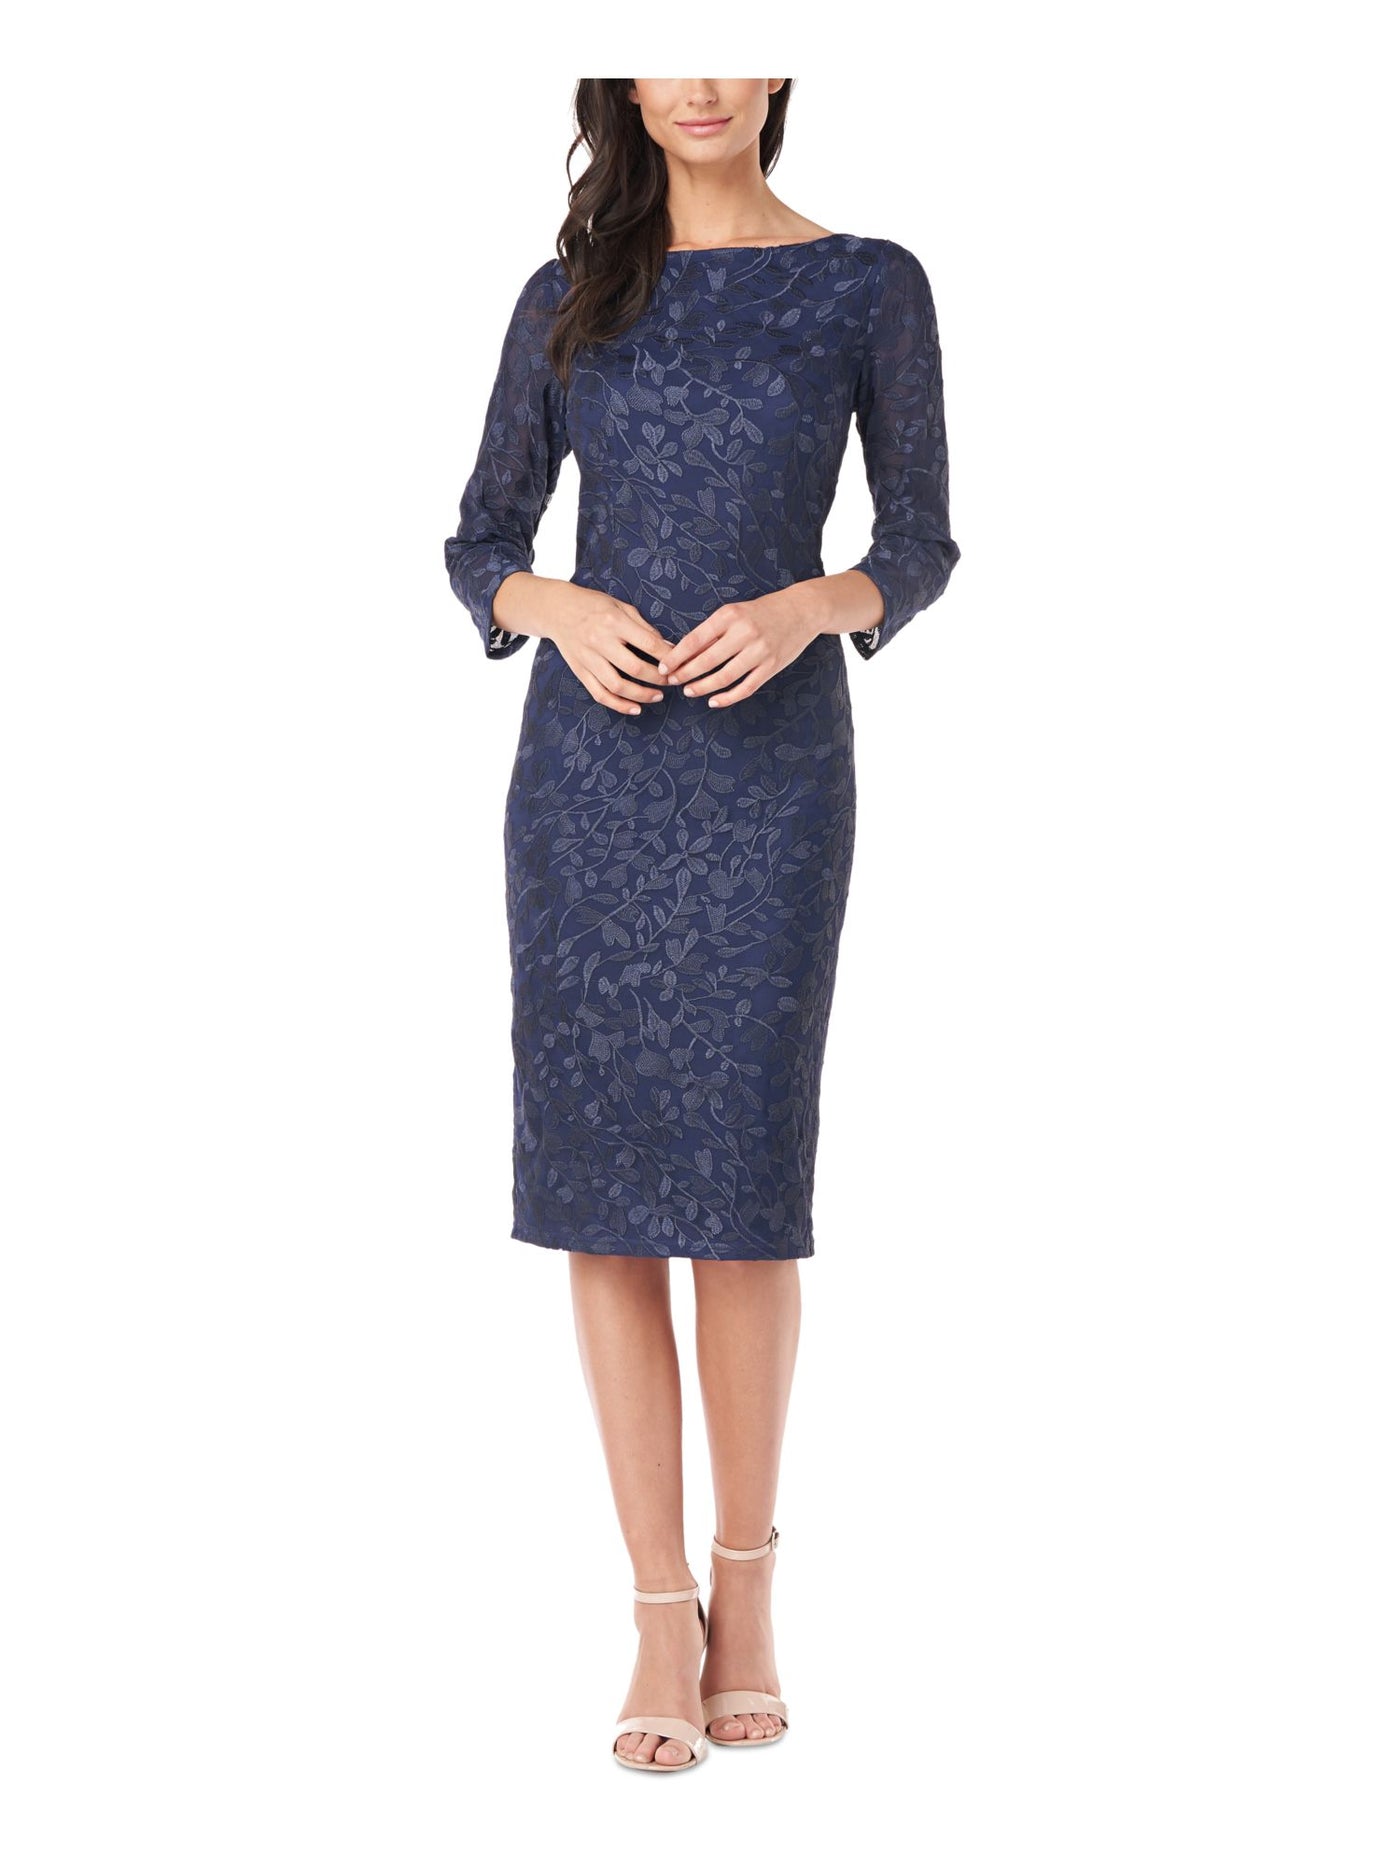 JS COLLECTION Womens Embroidered Zippered 3/4 Sleeve Boat Neck Below The Knee Evening Sheath Dress